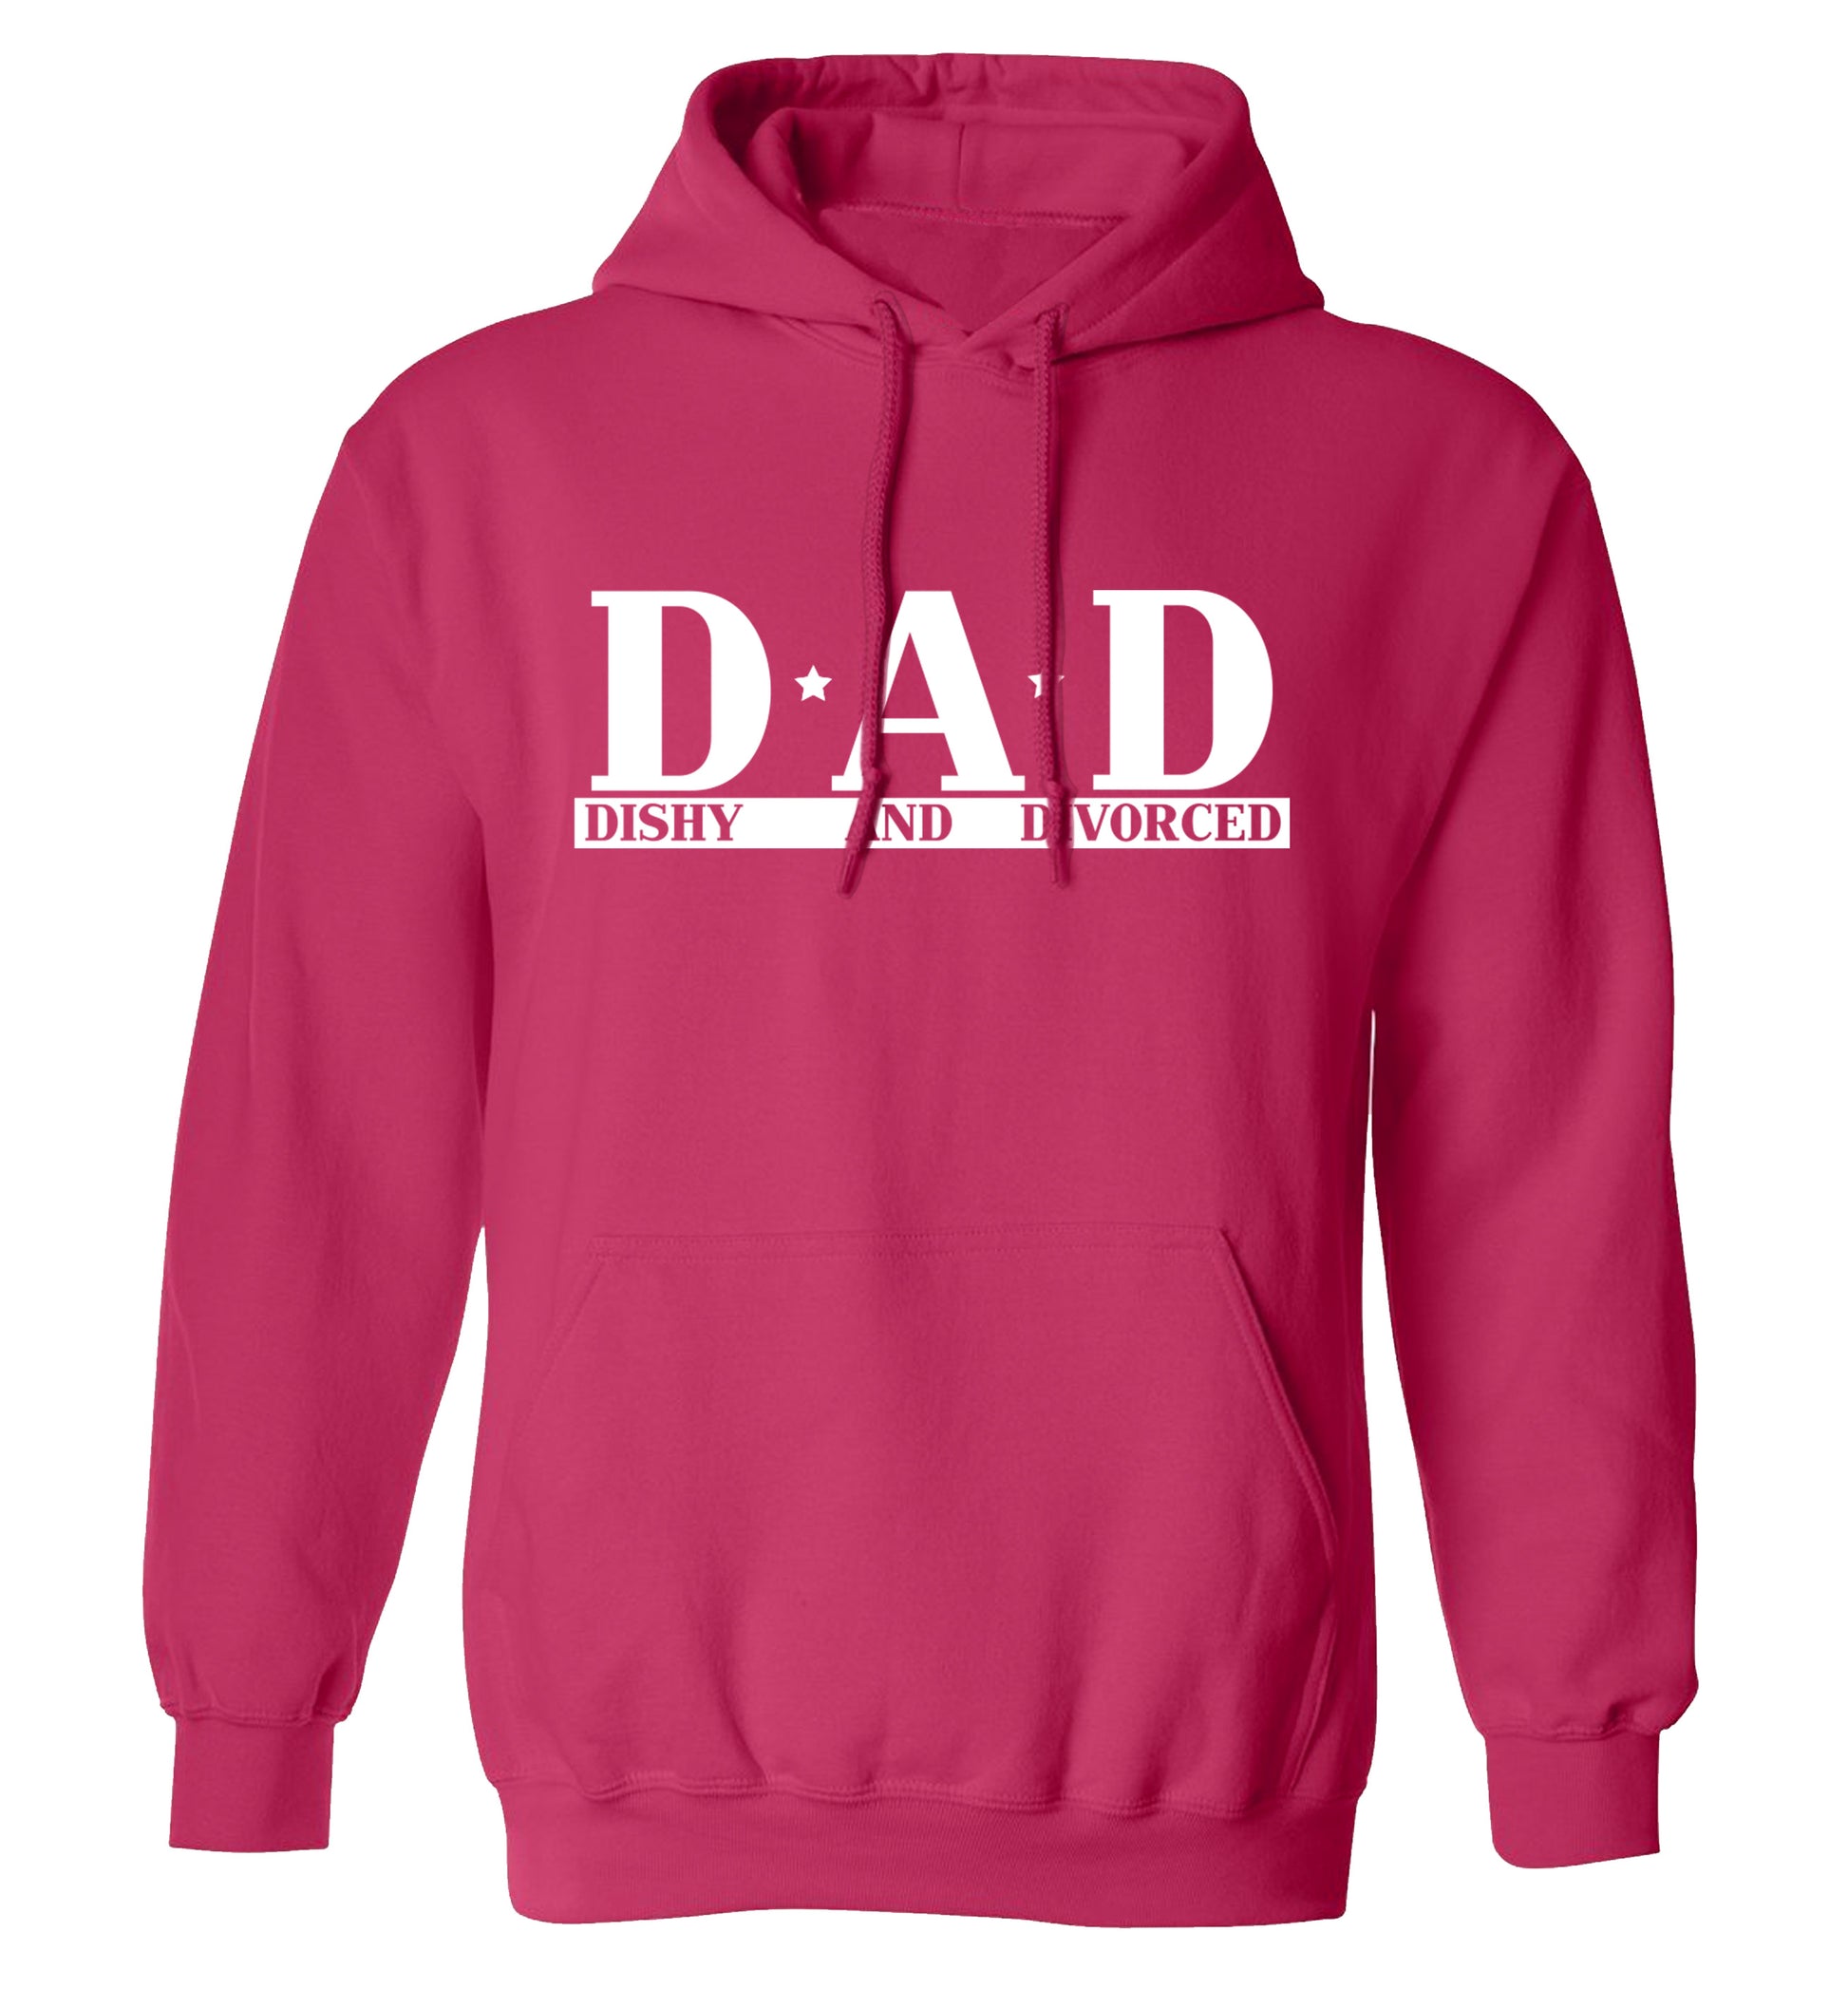 D.A.D meaning Dishy and Divorced adults unisex pink hoodie 2XL